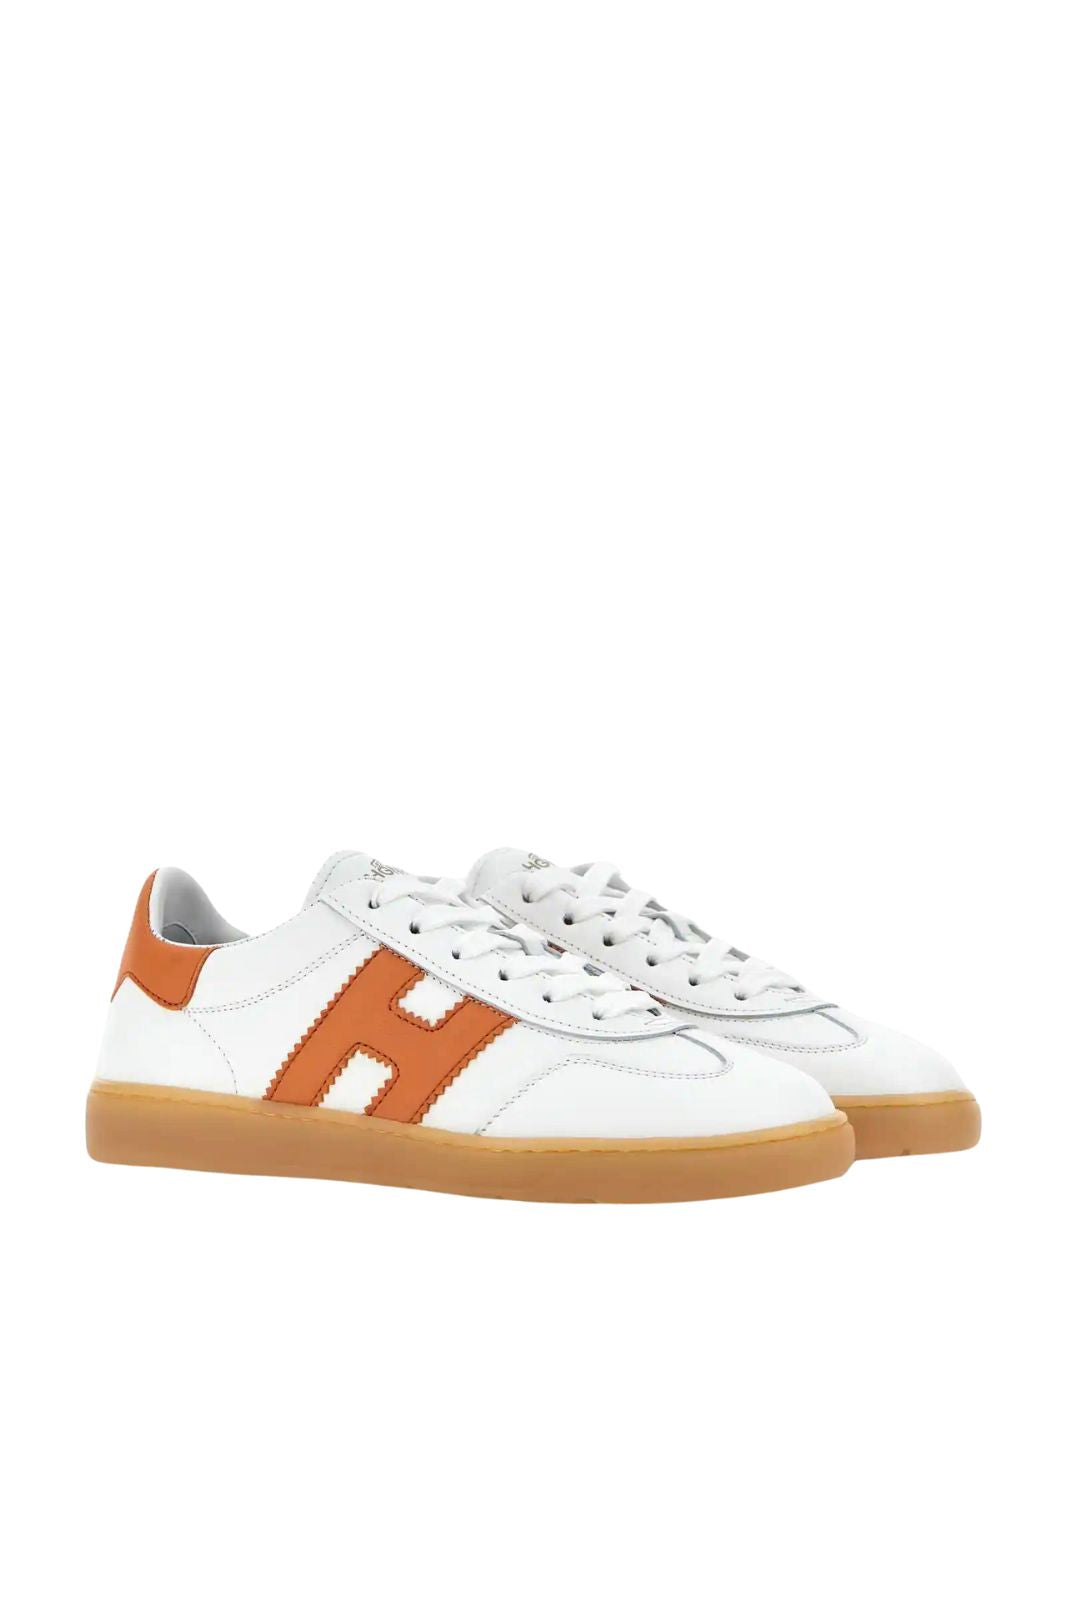 Hogan sneakers donna Cool